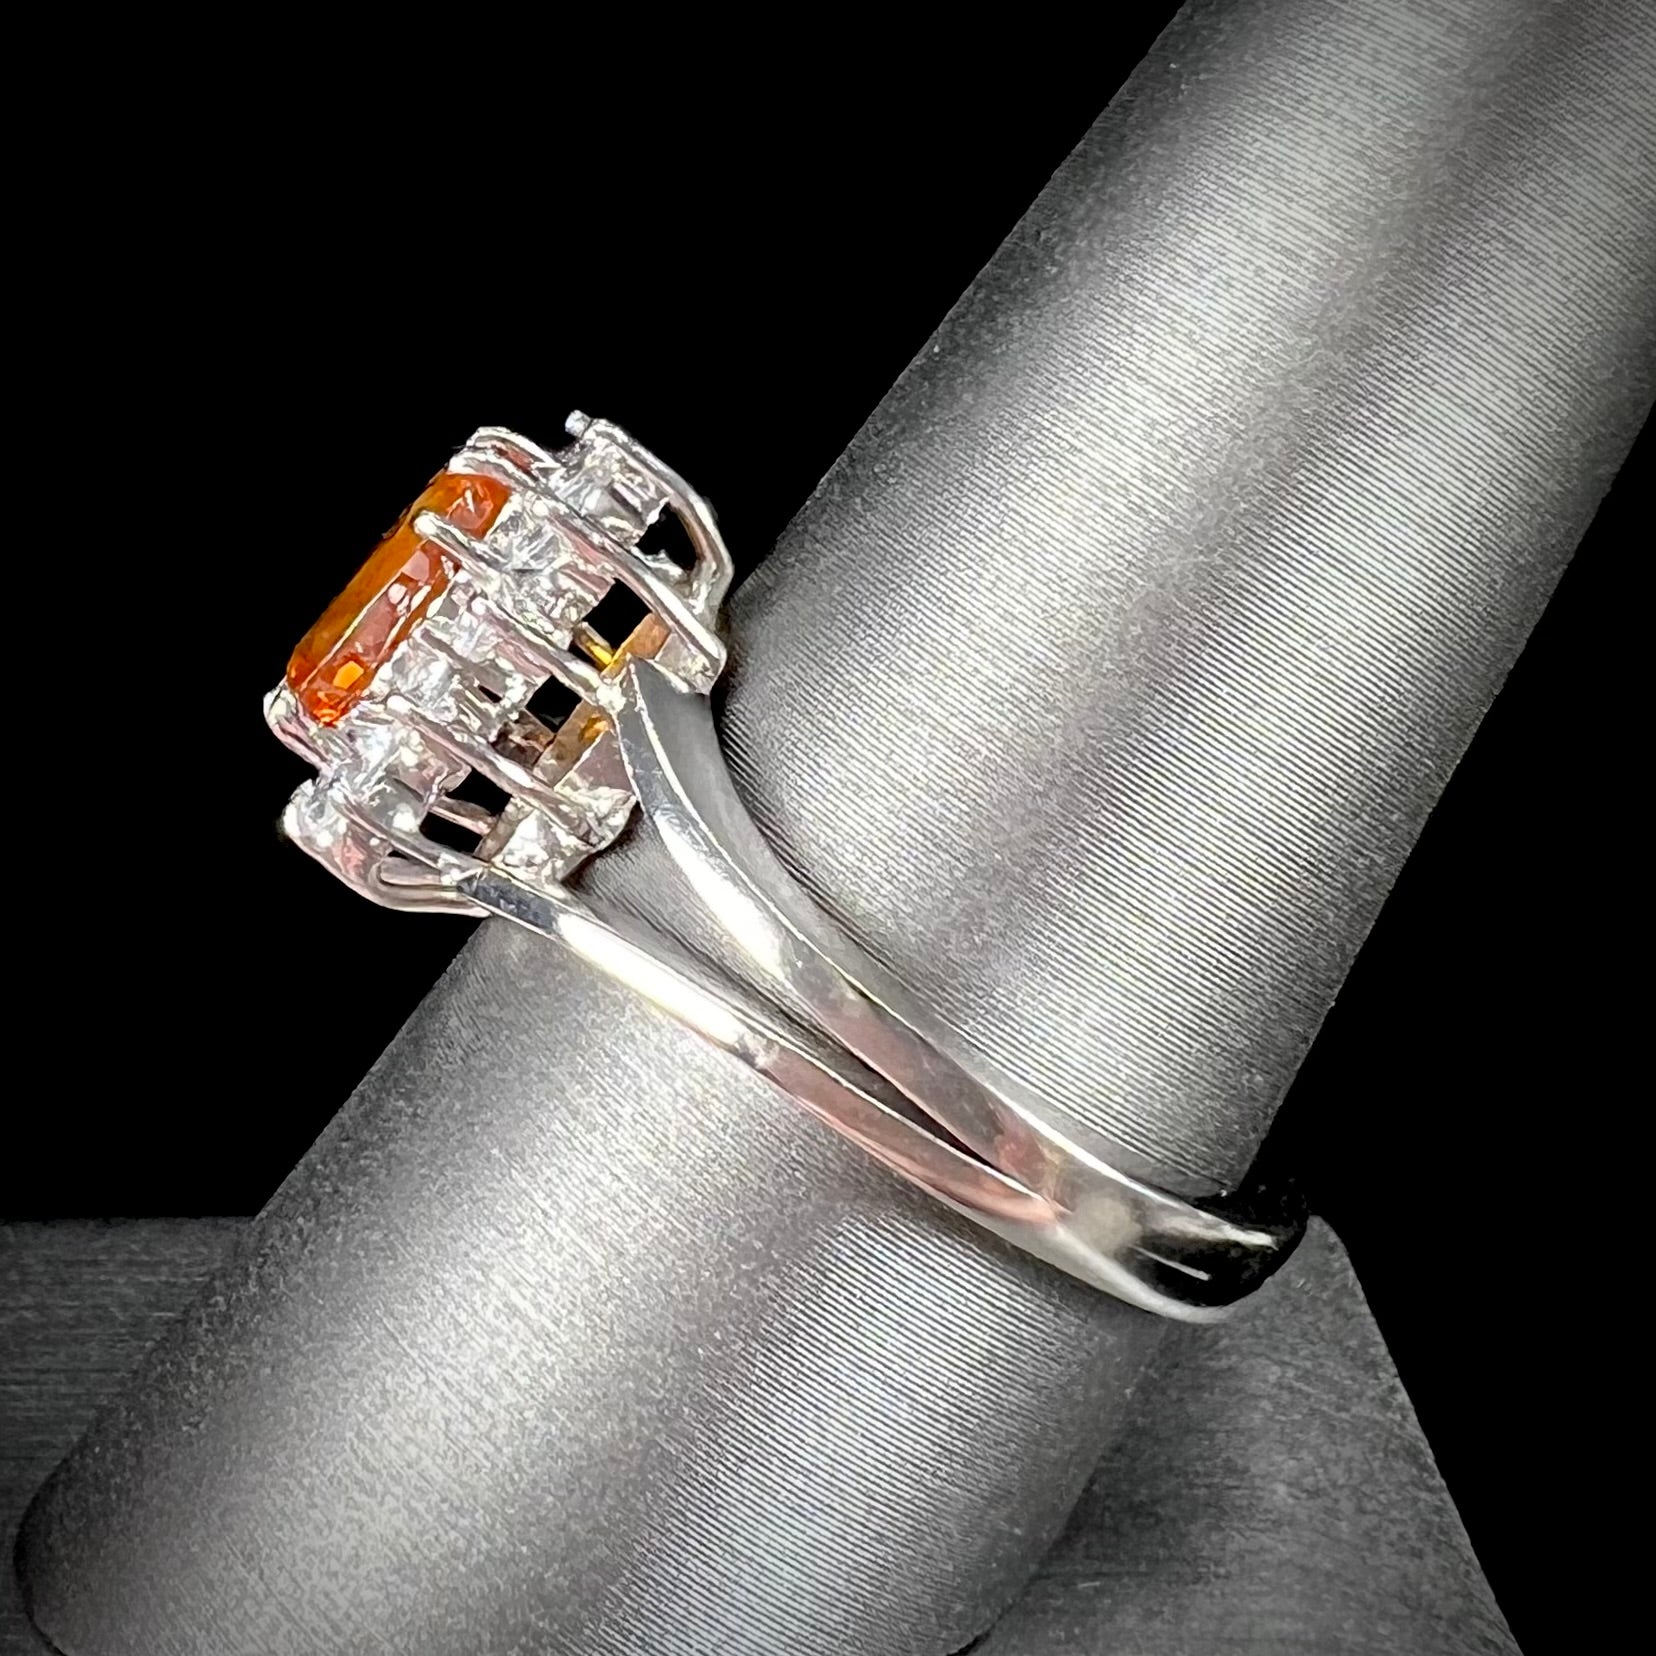 A white gold split shank ring set with an oval cut orange sapphire and a halo of white sapphires.